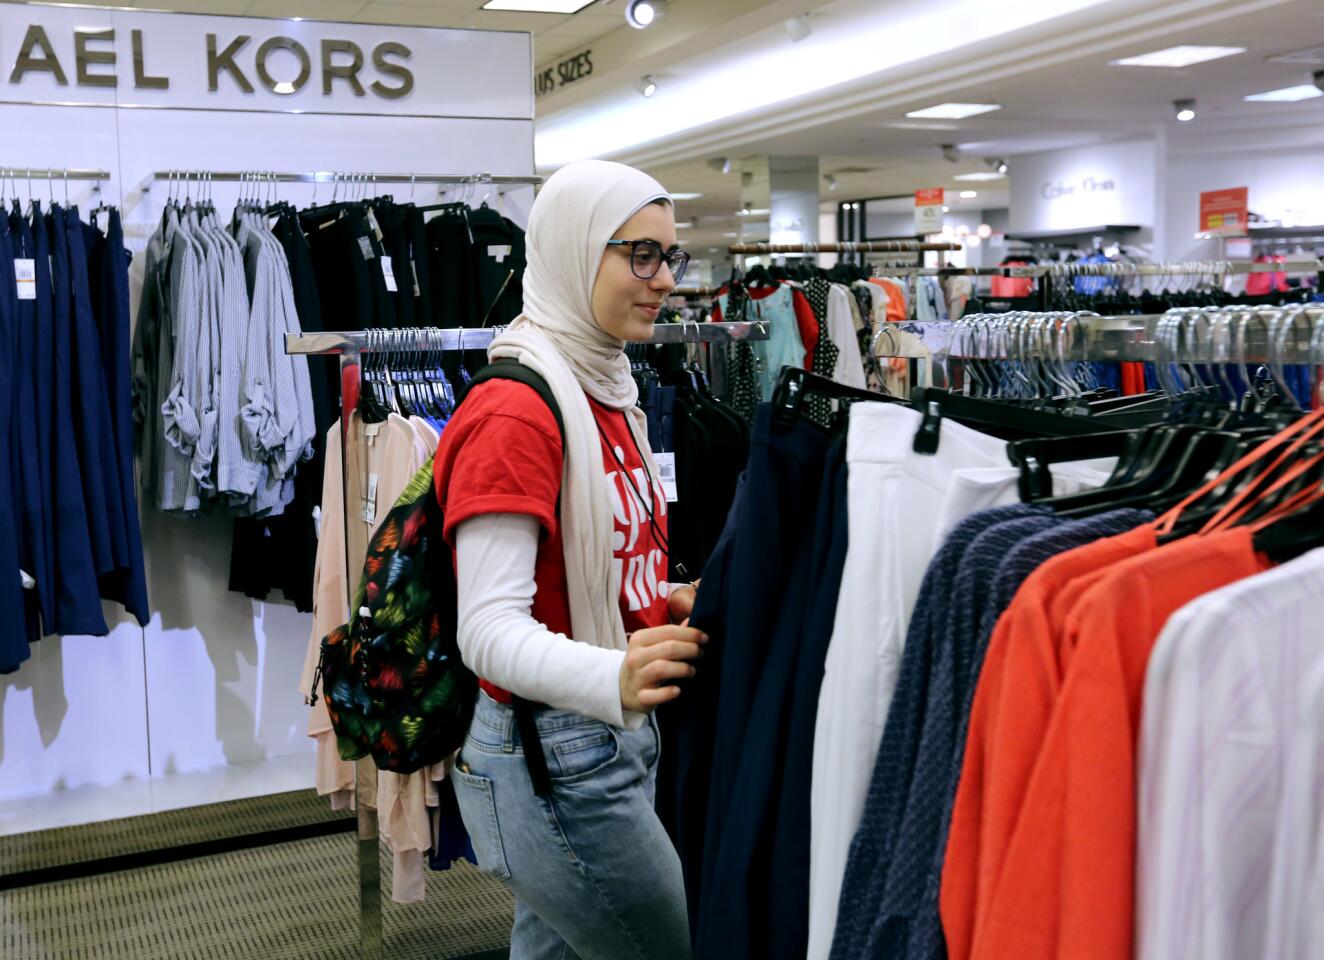 Mariam Al Mounasher shops for clothes Wednesday during Girls Inc. of Orange County's mentoring event at Macy's at South Coast Plaza in Costa Mesa. Ninety-five high school sophomores and juniors participated in interview workshops and style advice to prepare for prospective jobs.